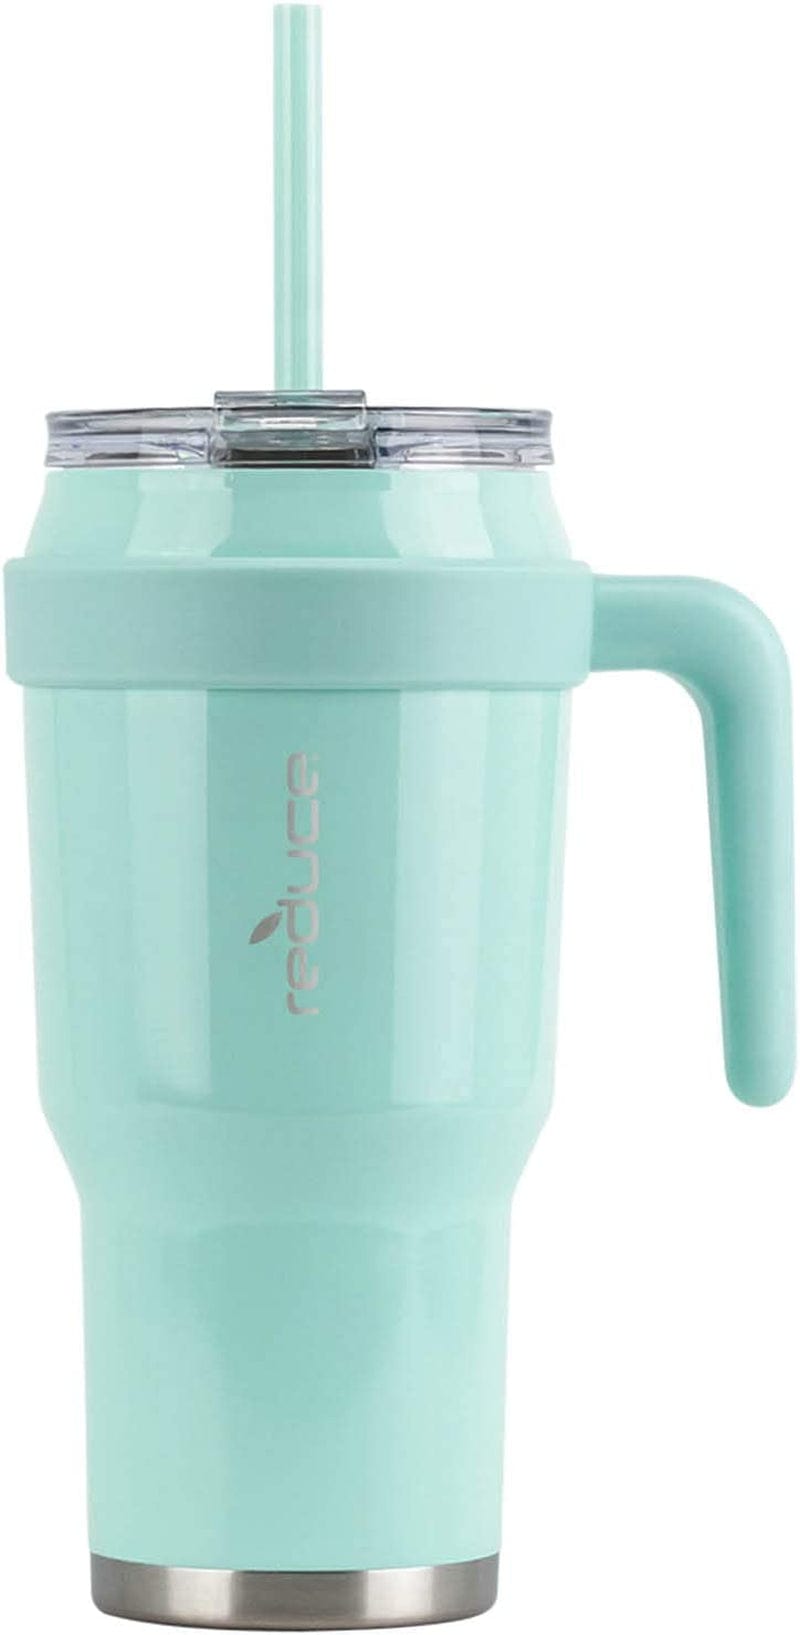 Reduce 40 Oz Tumbler with Handle and Straw, Stainless Steel with Sip-It-Your-Way Lid - Keeps Drinks Cold up to 34 Hours - Sweat Proof, Dishwasher Safe, BPA Free - Mild Mint, Opaque Gloss Home & Garden > Kitchen & Dining > Tableware > Drinkware REDUCE   